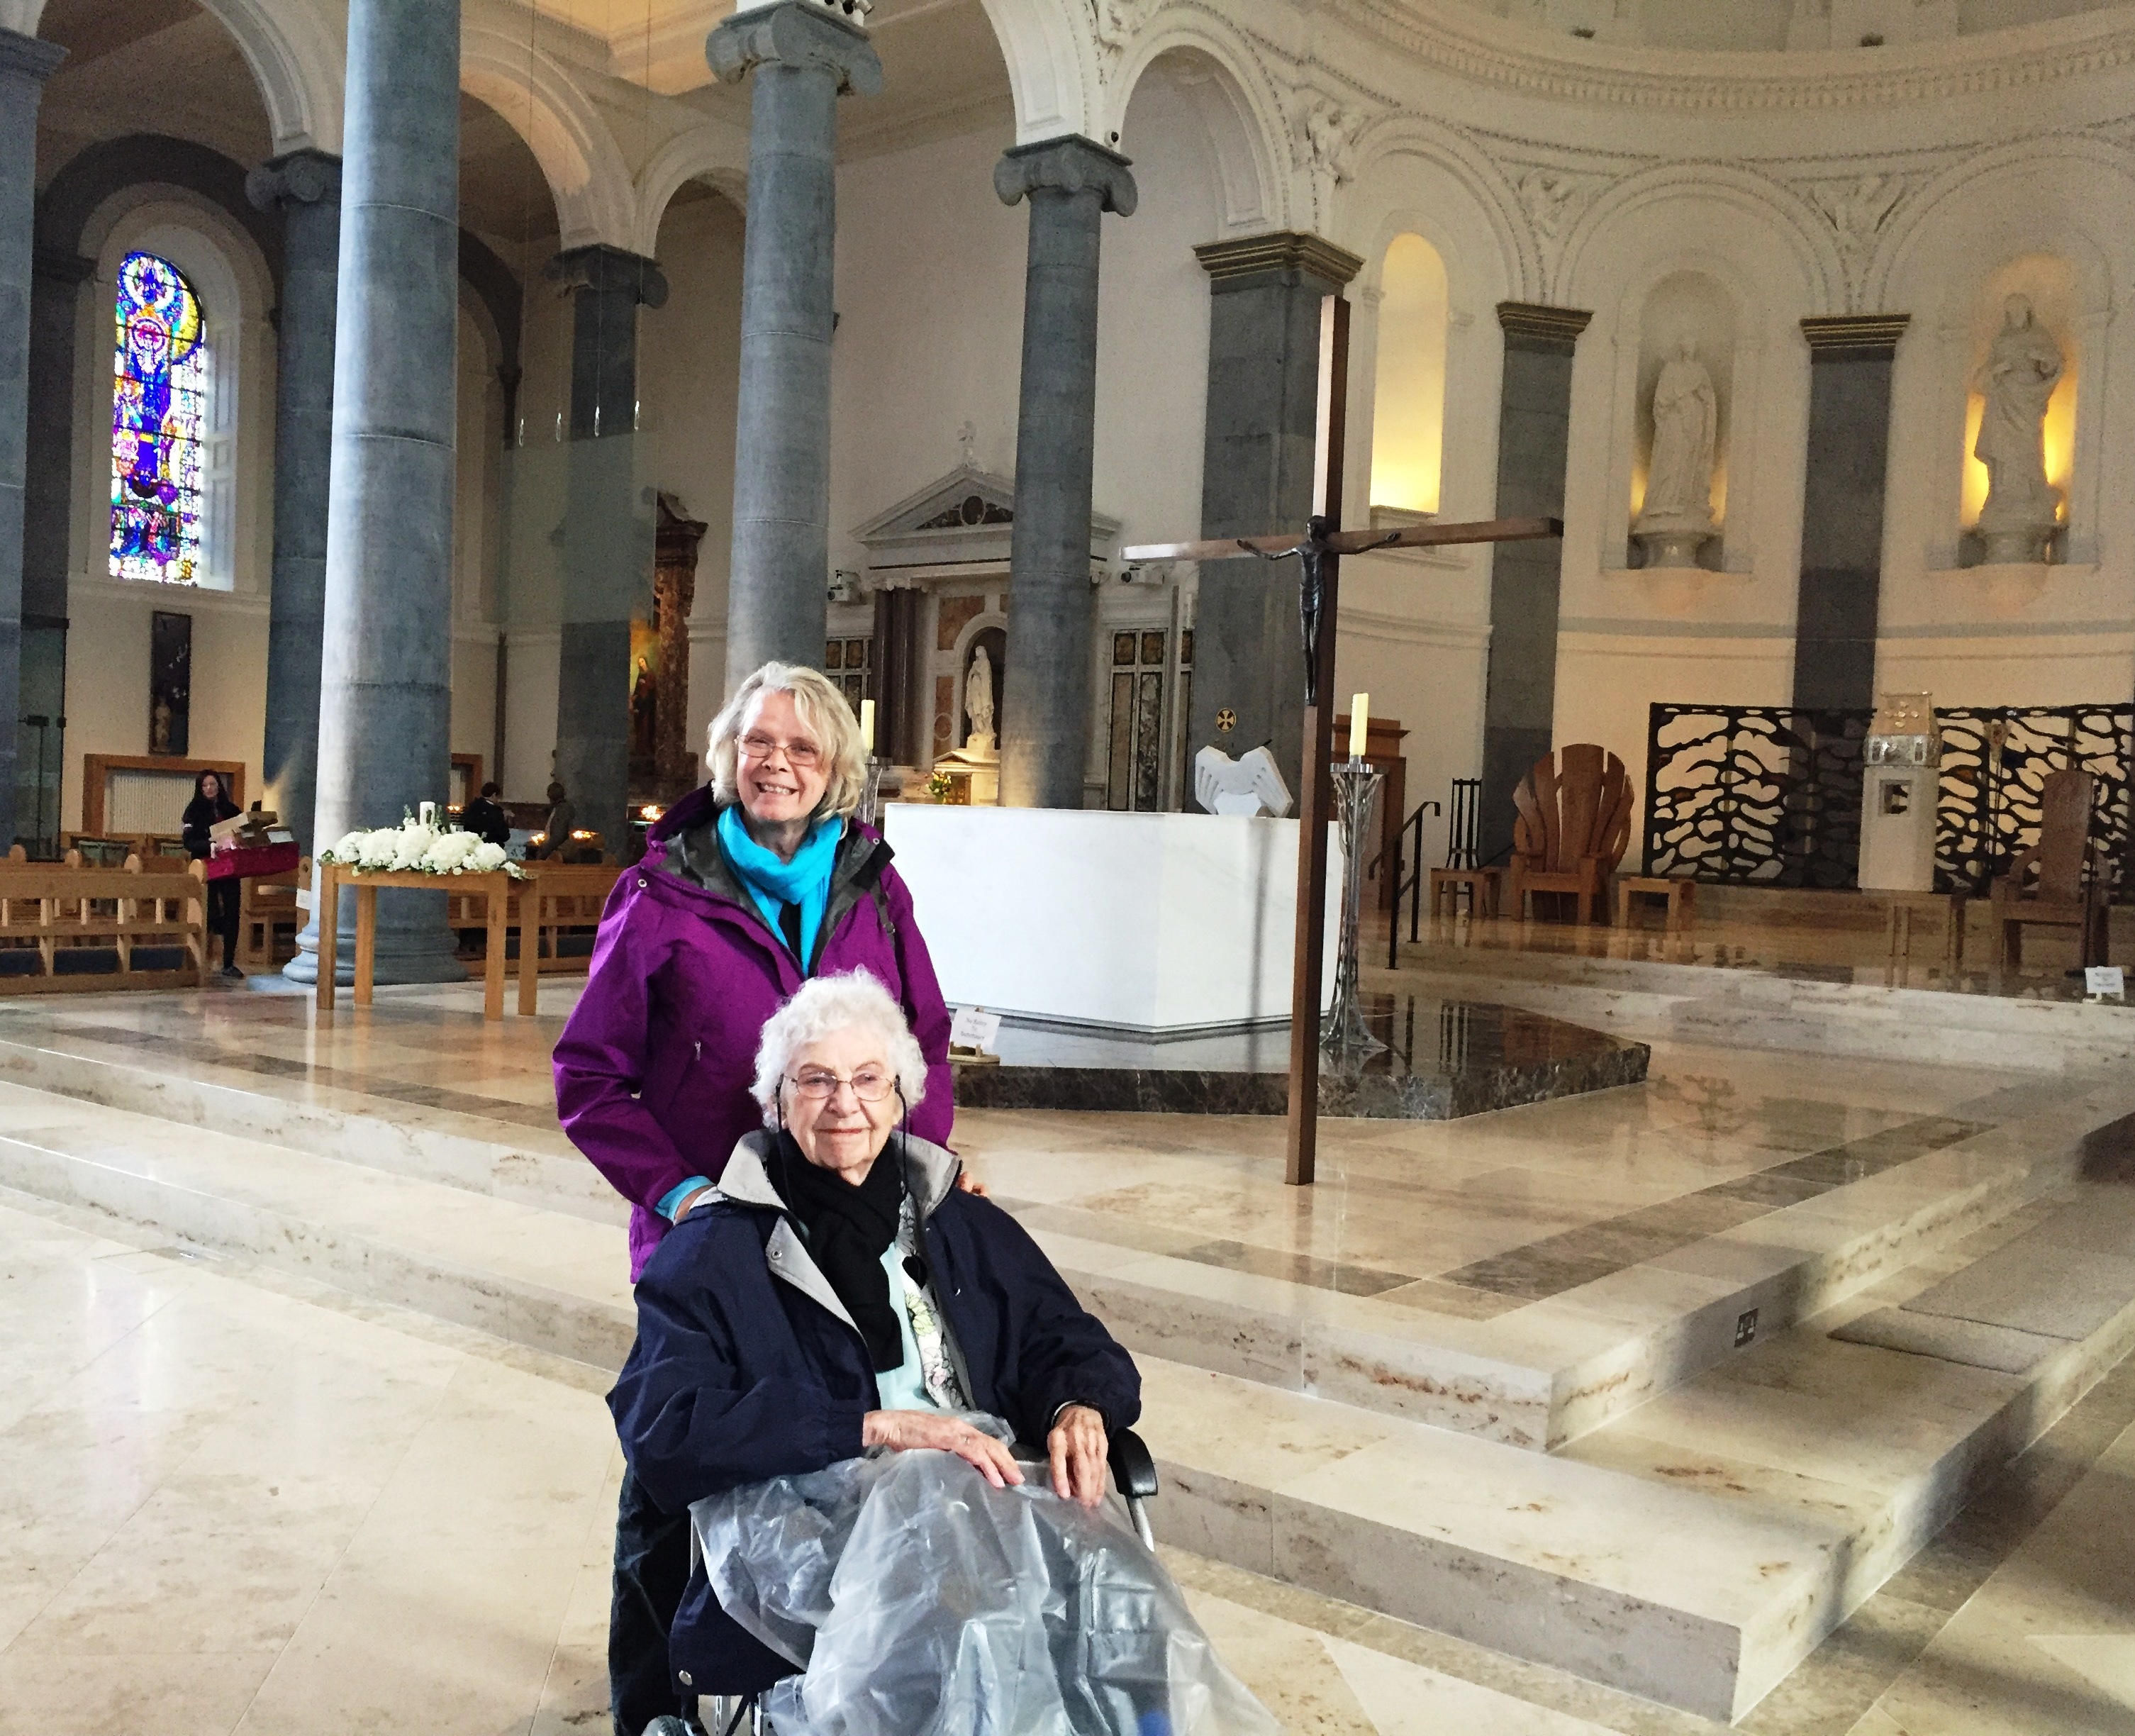 Annis and Roberta in St. Mel's Cathedral in Longford, where we said prayers to remember our Whelan/Wheelan ancestors who came from Co Longford. Photo by Martha Clark.